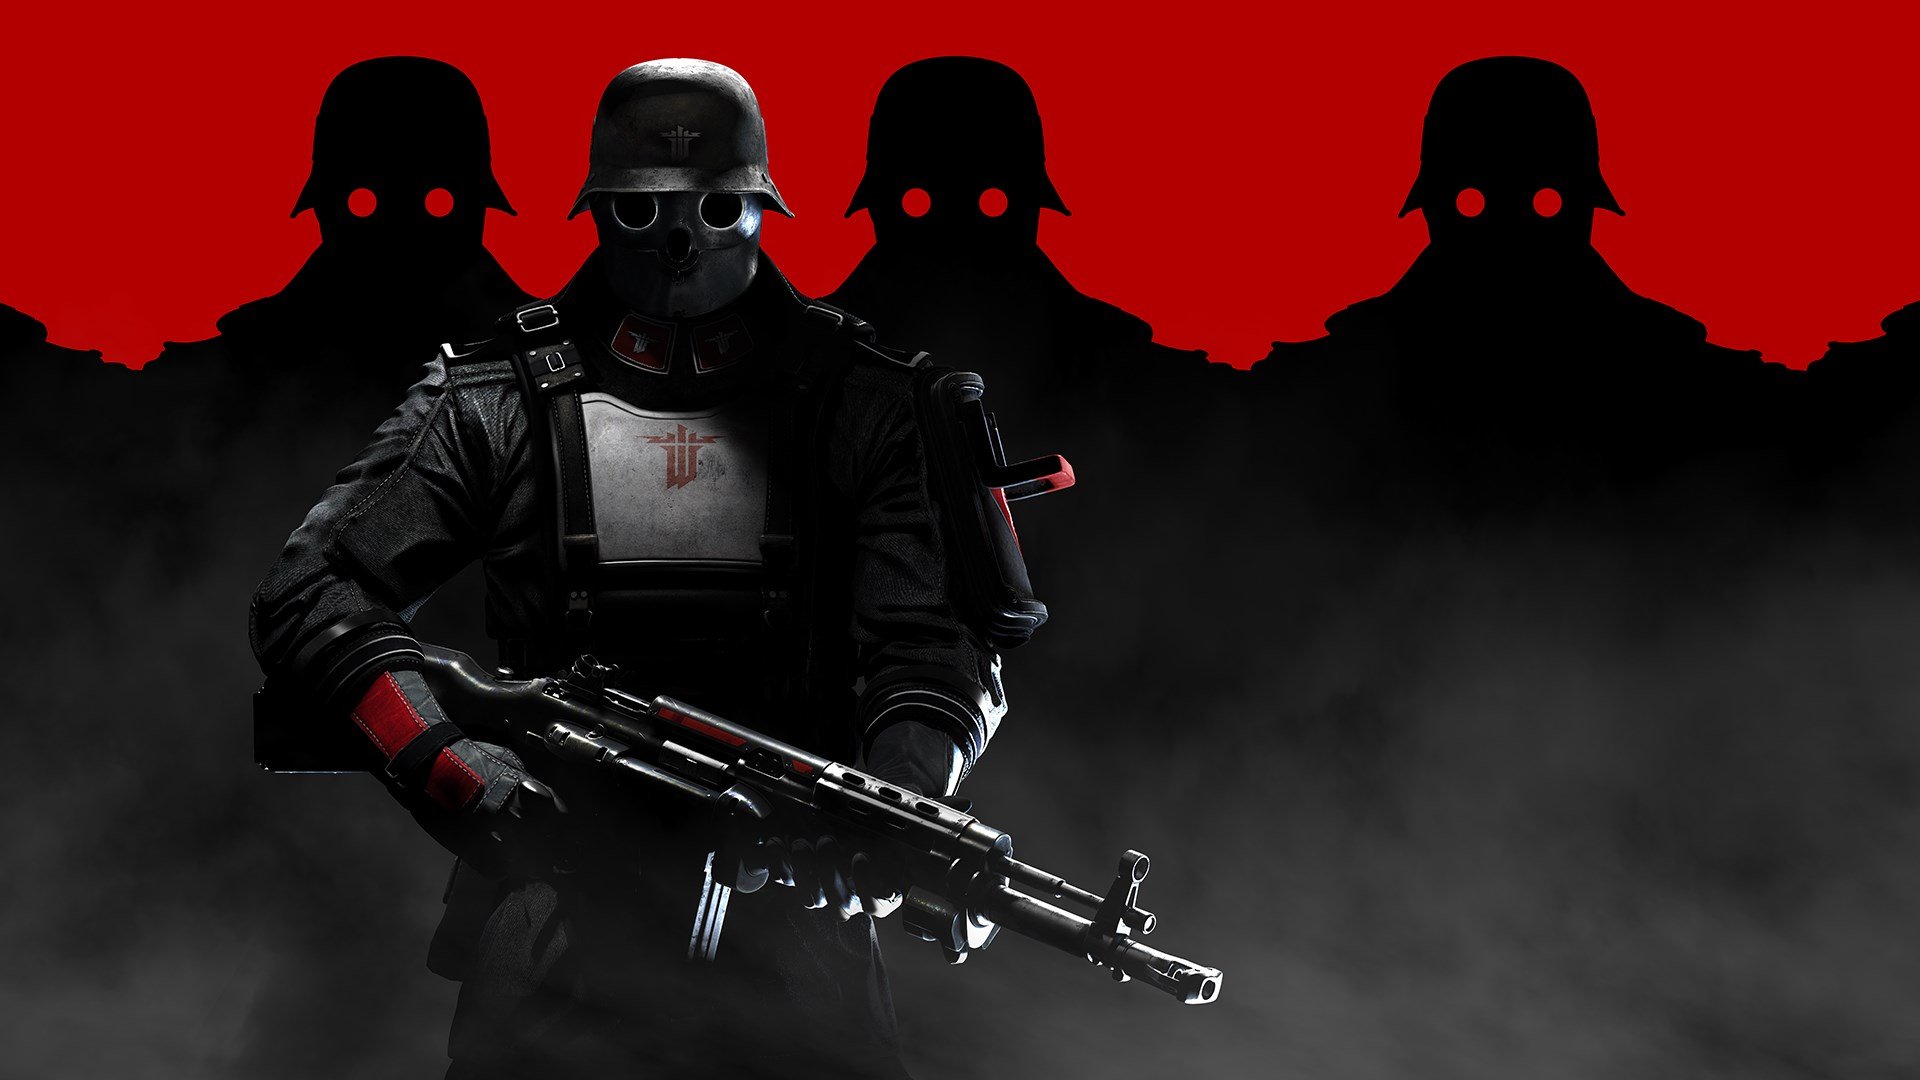 Wolfenstein: The New Order cover image